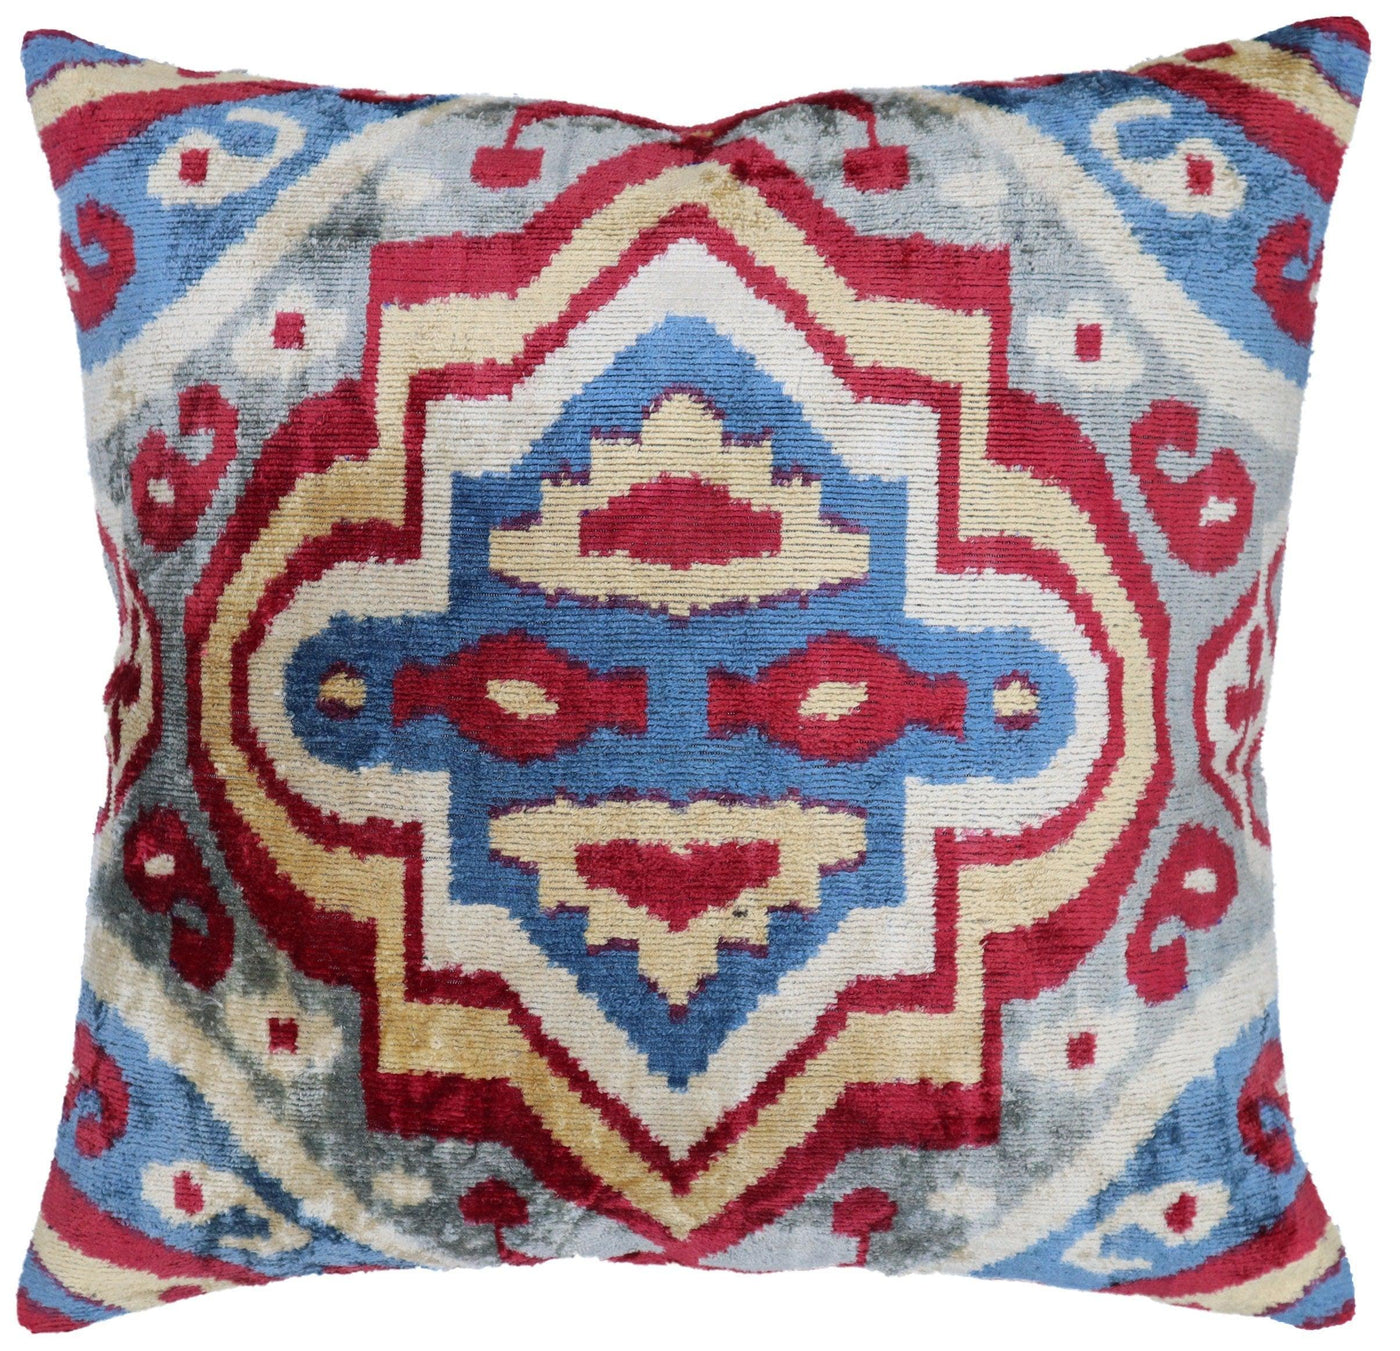 Canvello Handmade Colorful Pillows For Couch | 20 x 20 in (50 x 50 cm)